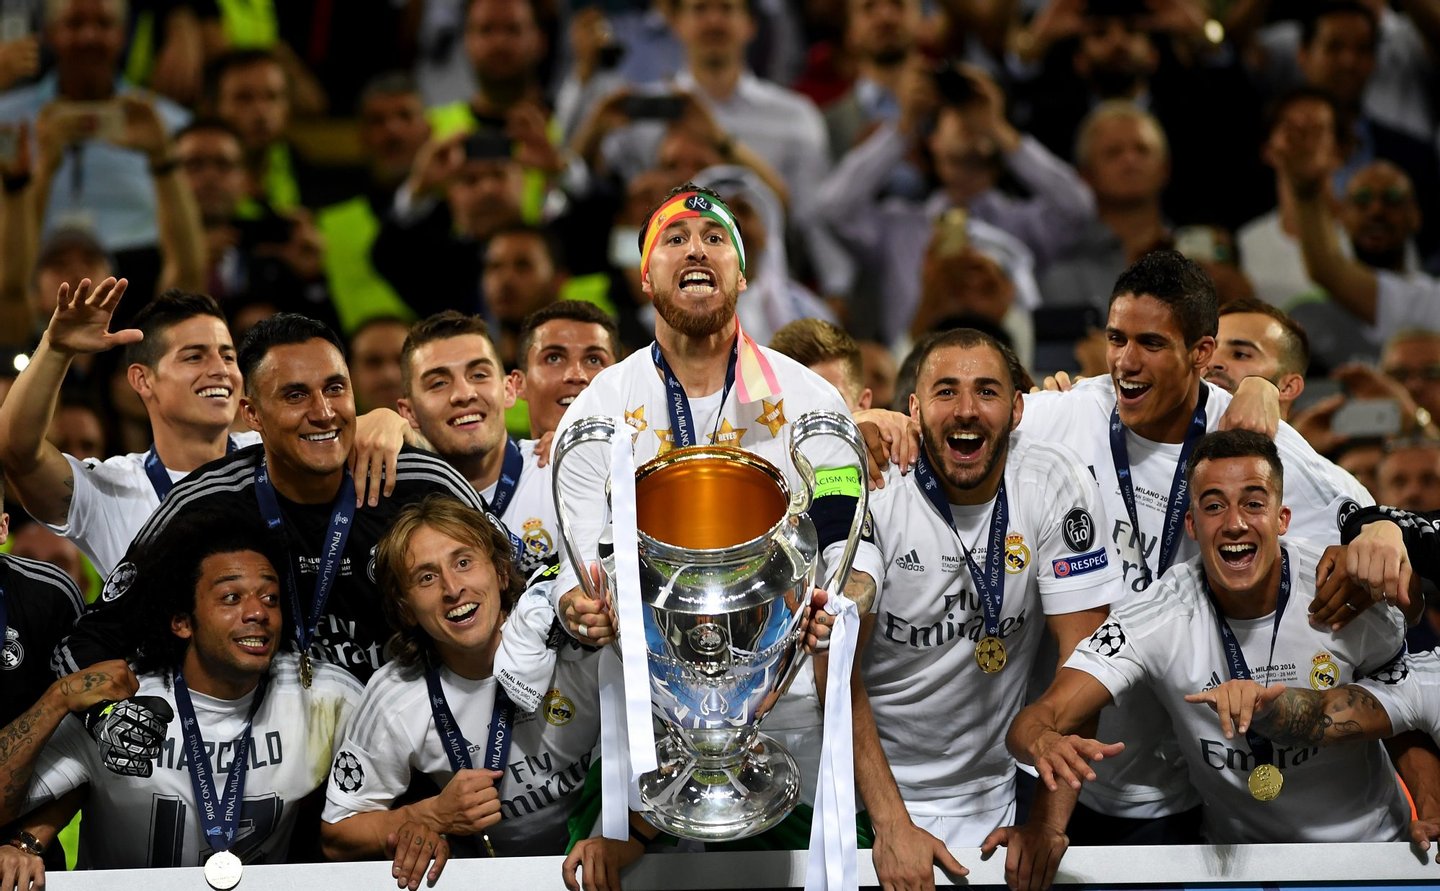 MILAN, ITALY - MAY 28:  Sergio Ramos of Real Madrid of Real Madrid lifts the Champions League trophy after the UEFA Champions League Final match between Real Madrid and Club Atletico de Madrid at Stadio Giuseppe Meazza on May 28, 2016 in Milan, Italy.  (Photo by Laurence Griffiths/Getty Images)